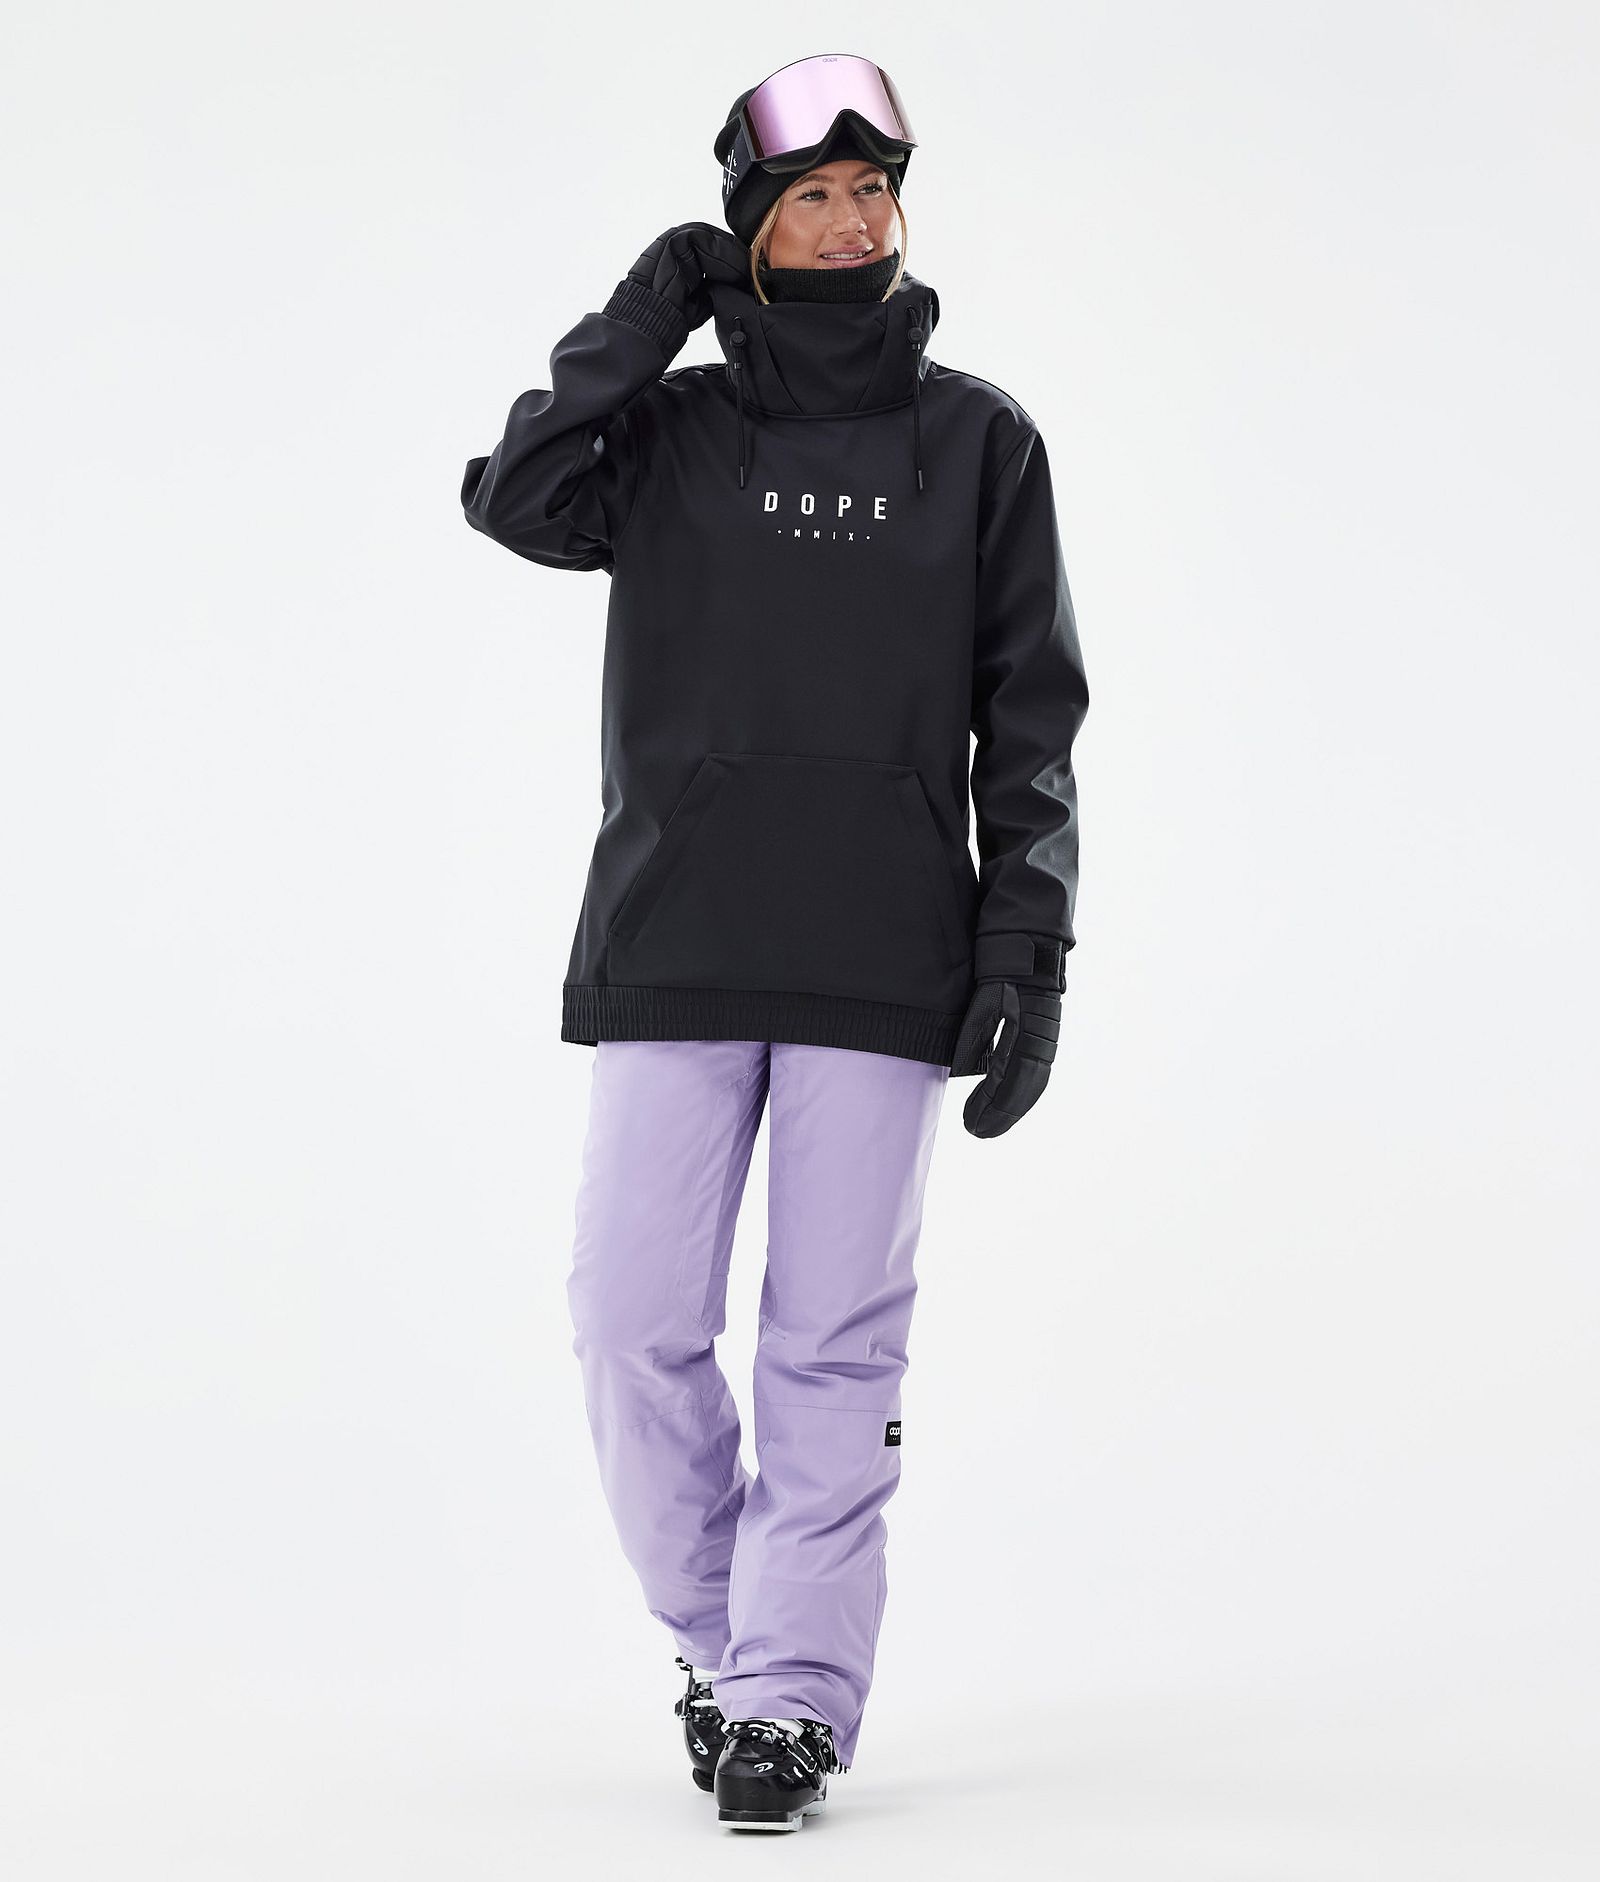 Dope Yeti W Outfit de Esquí Mujer Black/Faded Violet